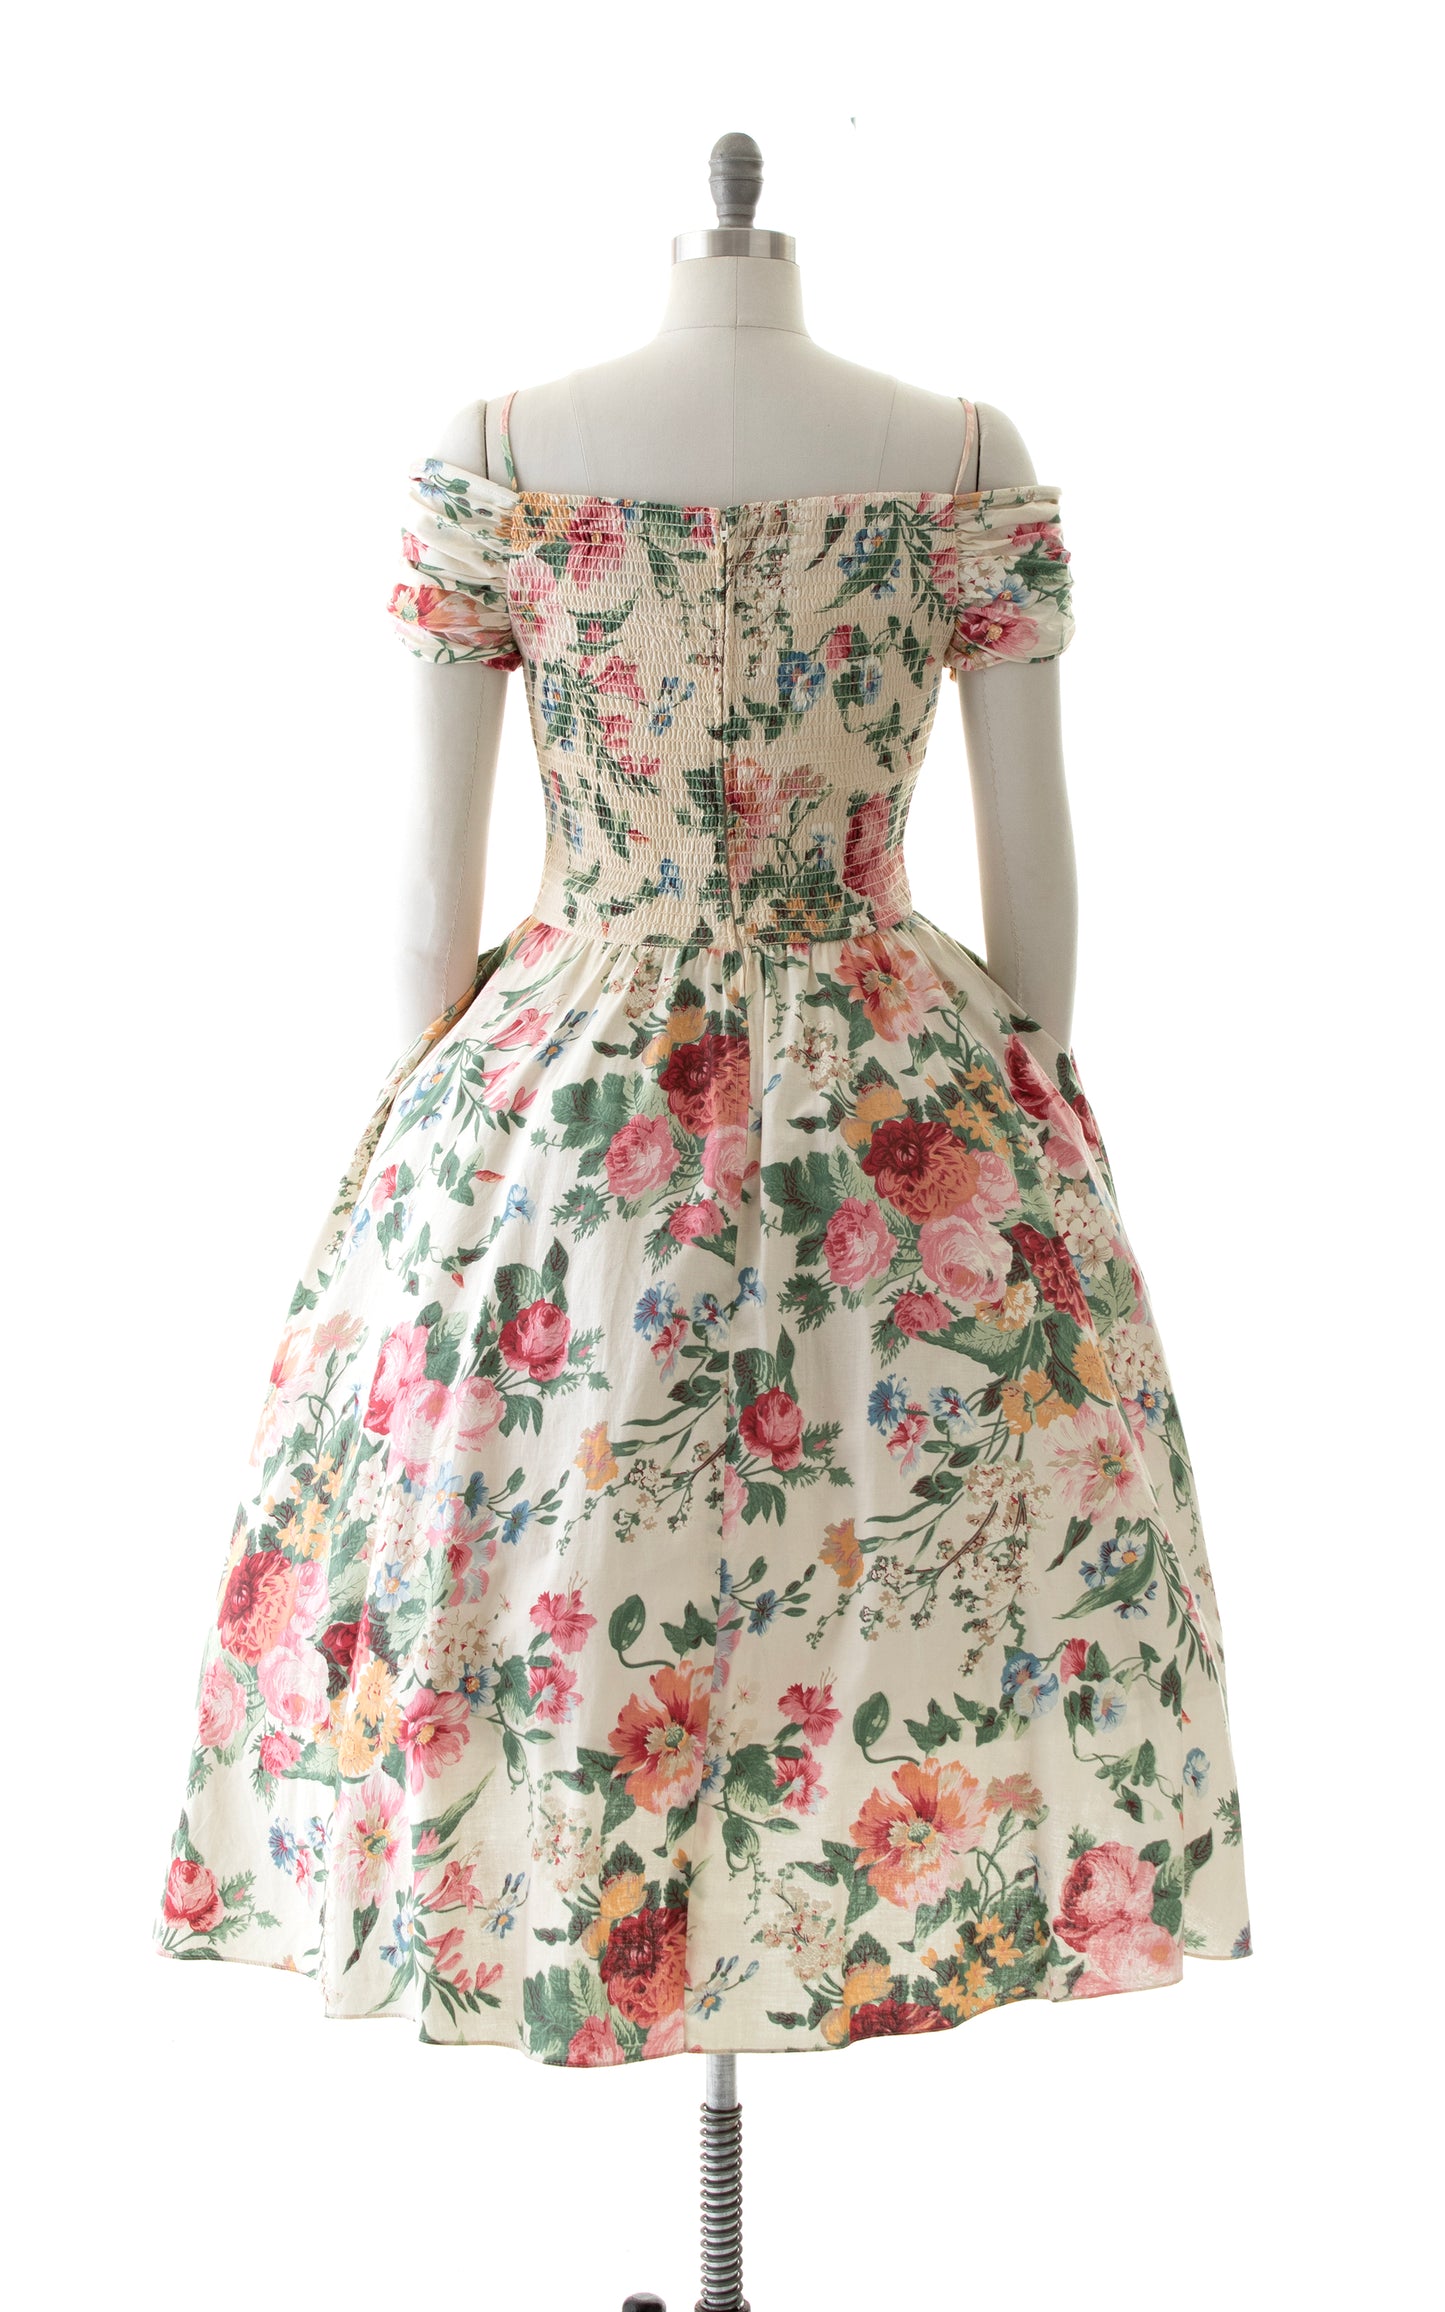 NEW ARRIVAL || 1980s Romantic Shirred Floral Dress with Pockets | small/medium